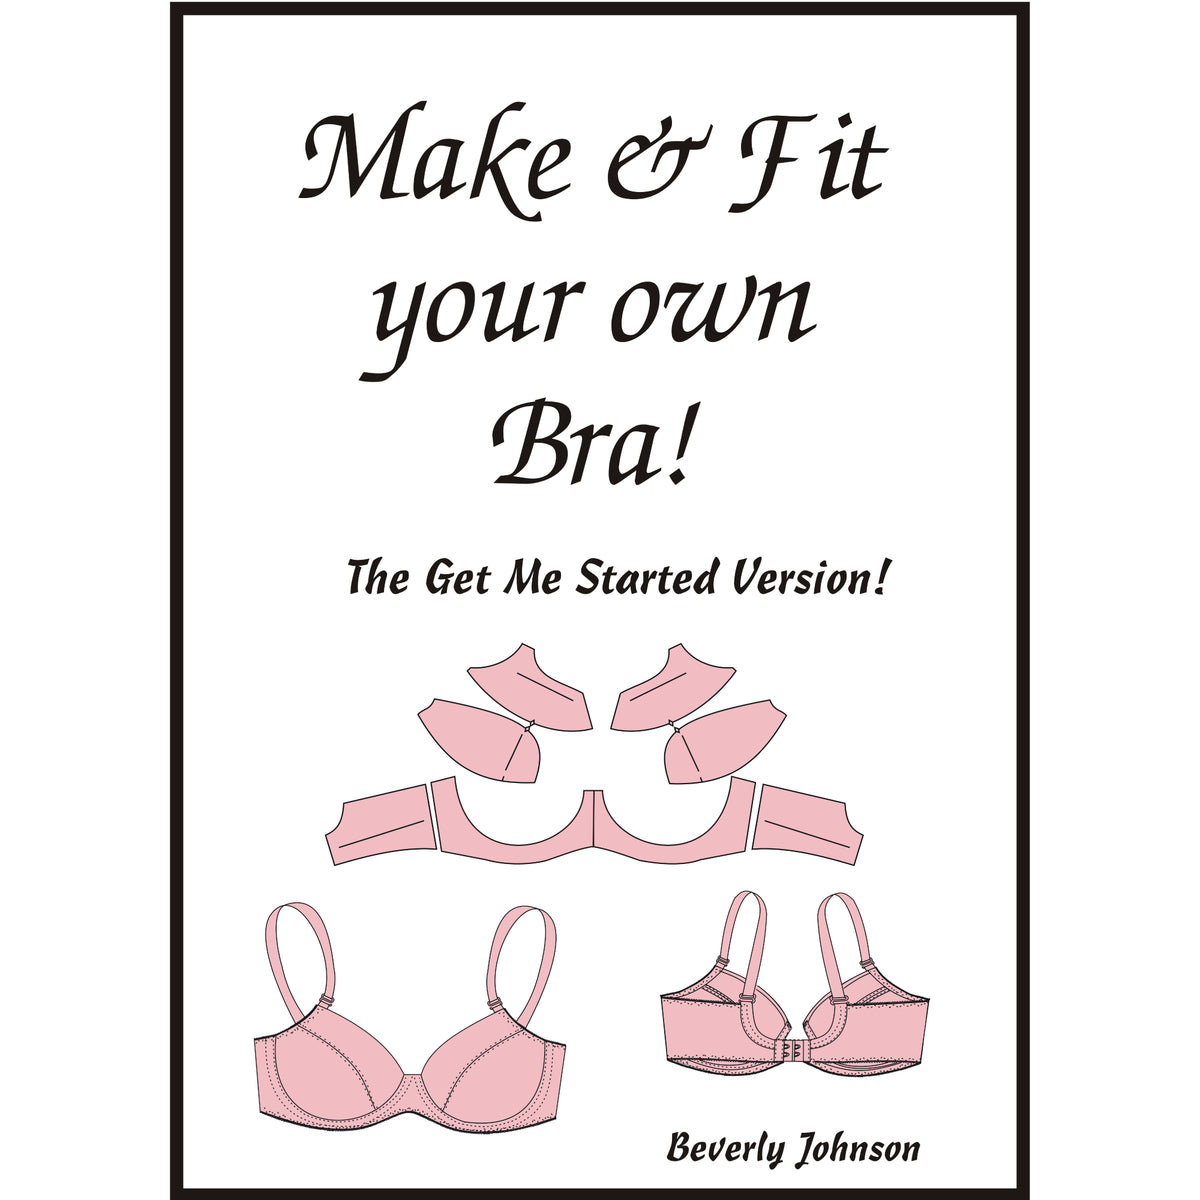 Bra Makers Book, Make & Fit Your Own Bra Book, Bra-Makers Supply